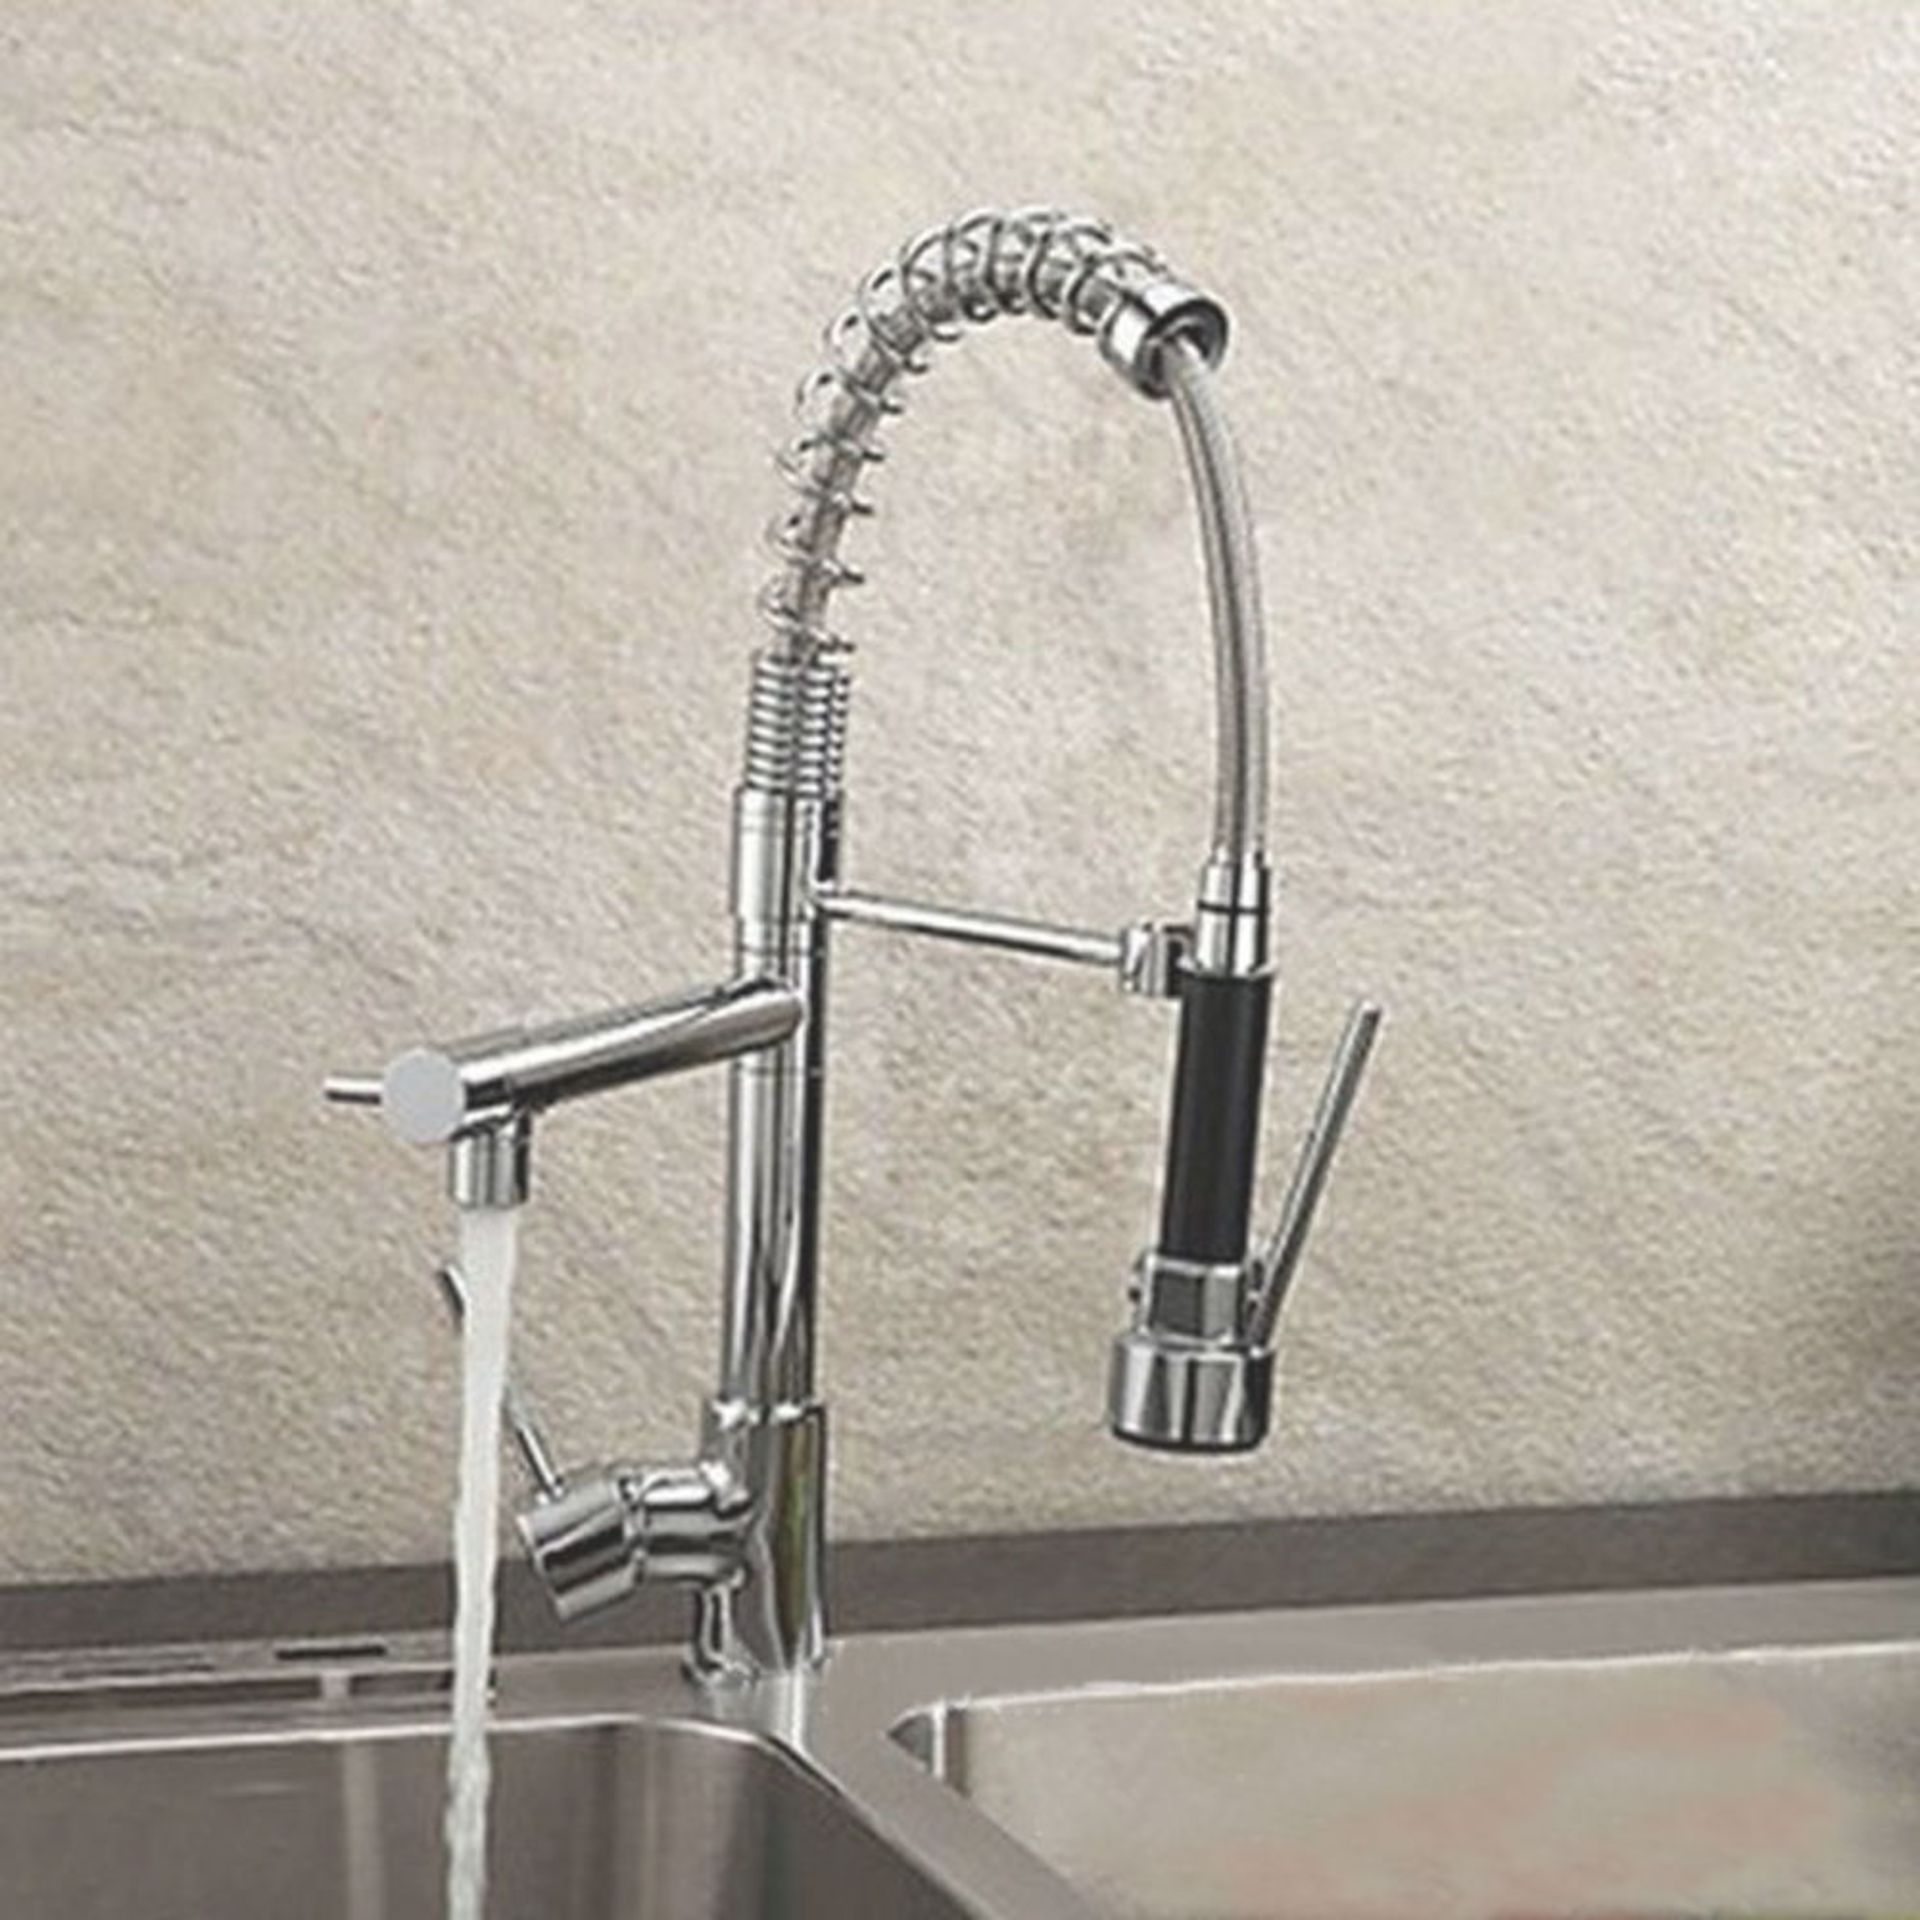 (MW191) Bentley Modern Monobloc Chrome Brass Pull Out Spray Mixer Tap. RRP £349.99. This tap is from